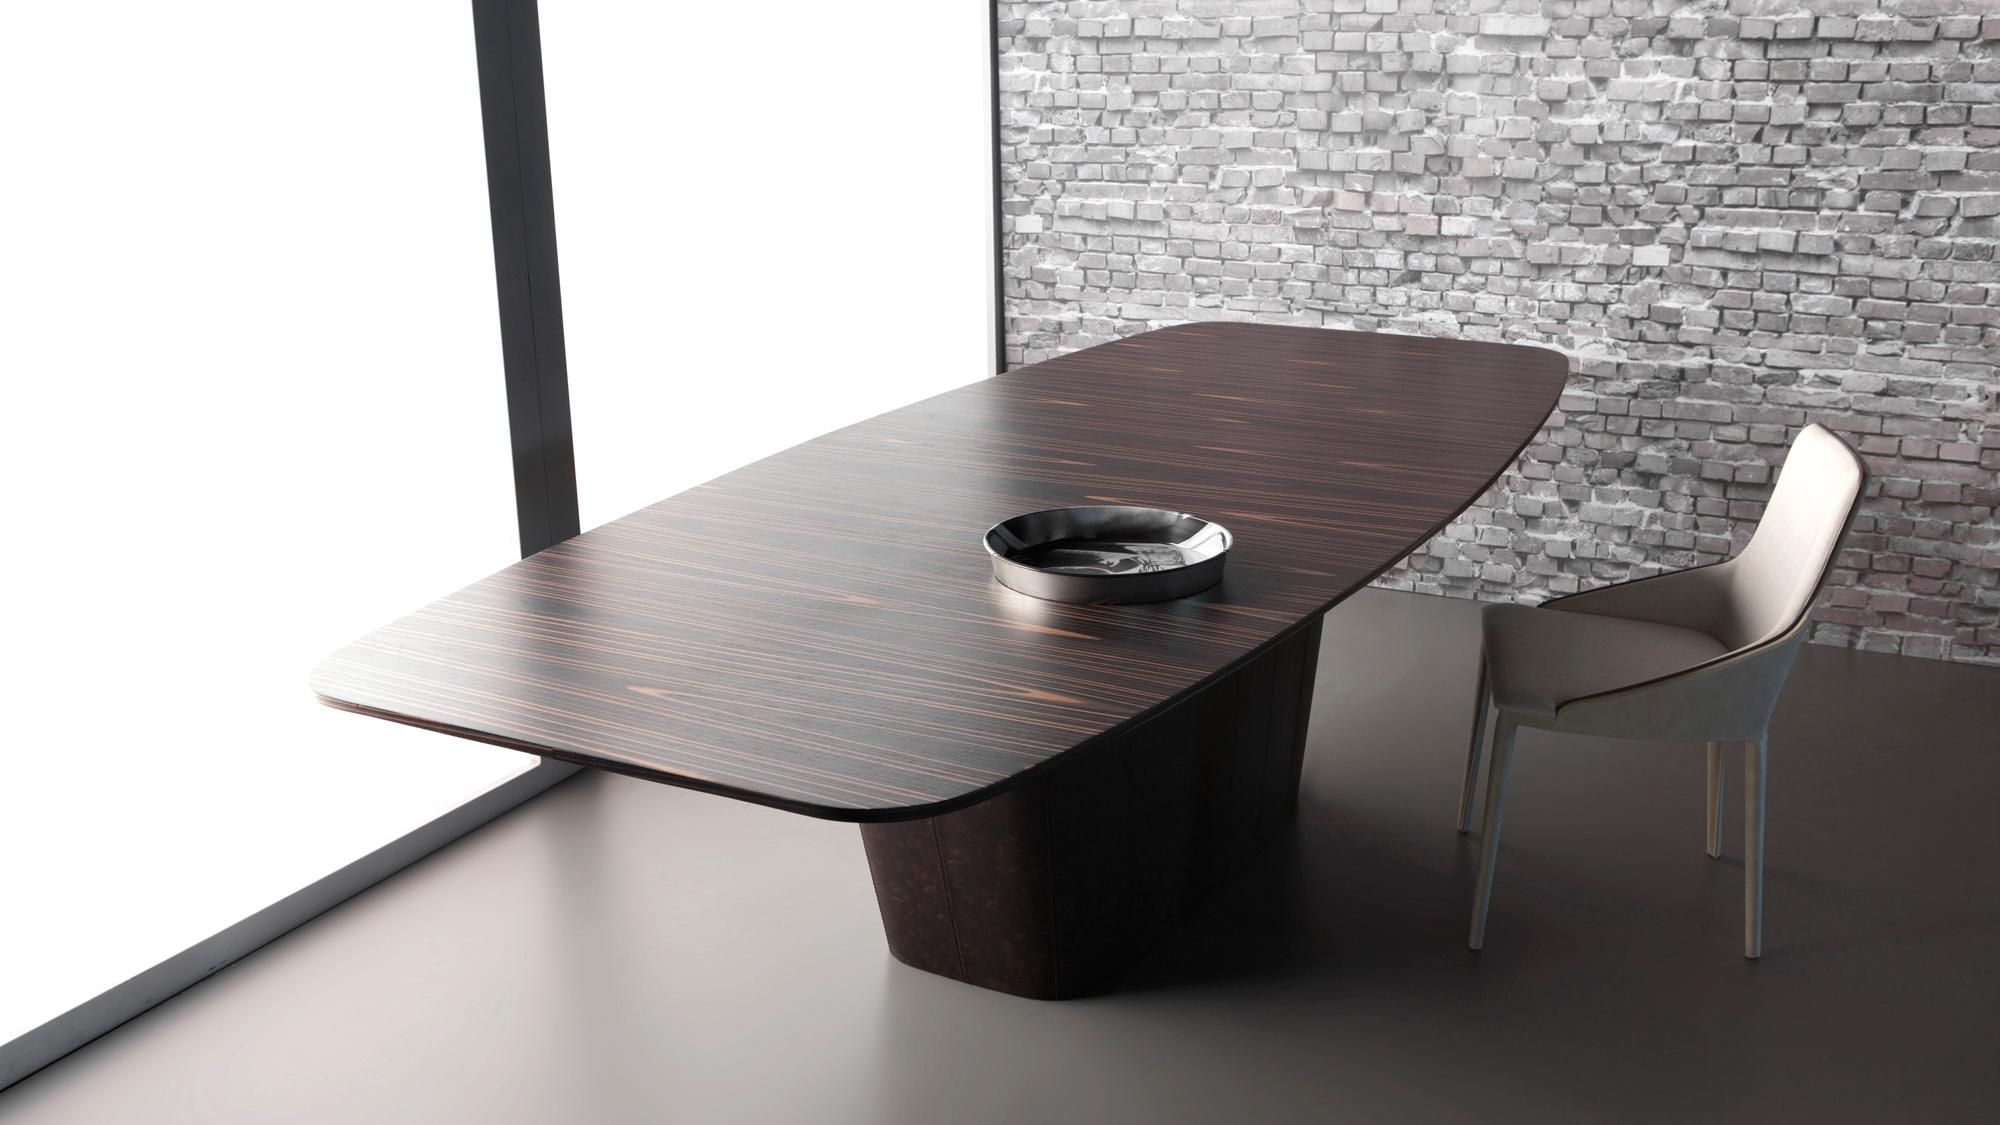 Prime Dining Table by Doimo Brasil
Dimensions: W 220 x D 120 x H 75 cm 
Materials: Base: Natural Leather, Top: Veneer. 

Also available in other dimensions. Please contact us.

With the intention of providing good taste and personality, Doimo